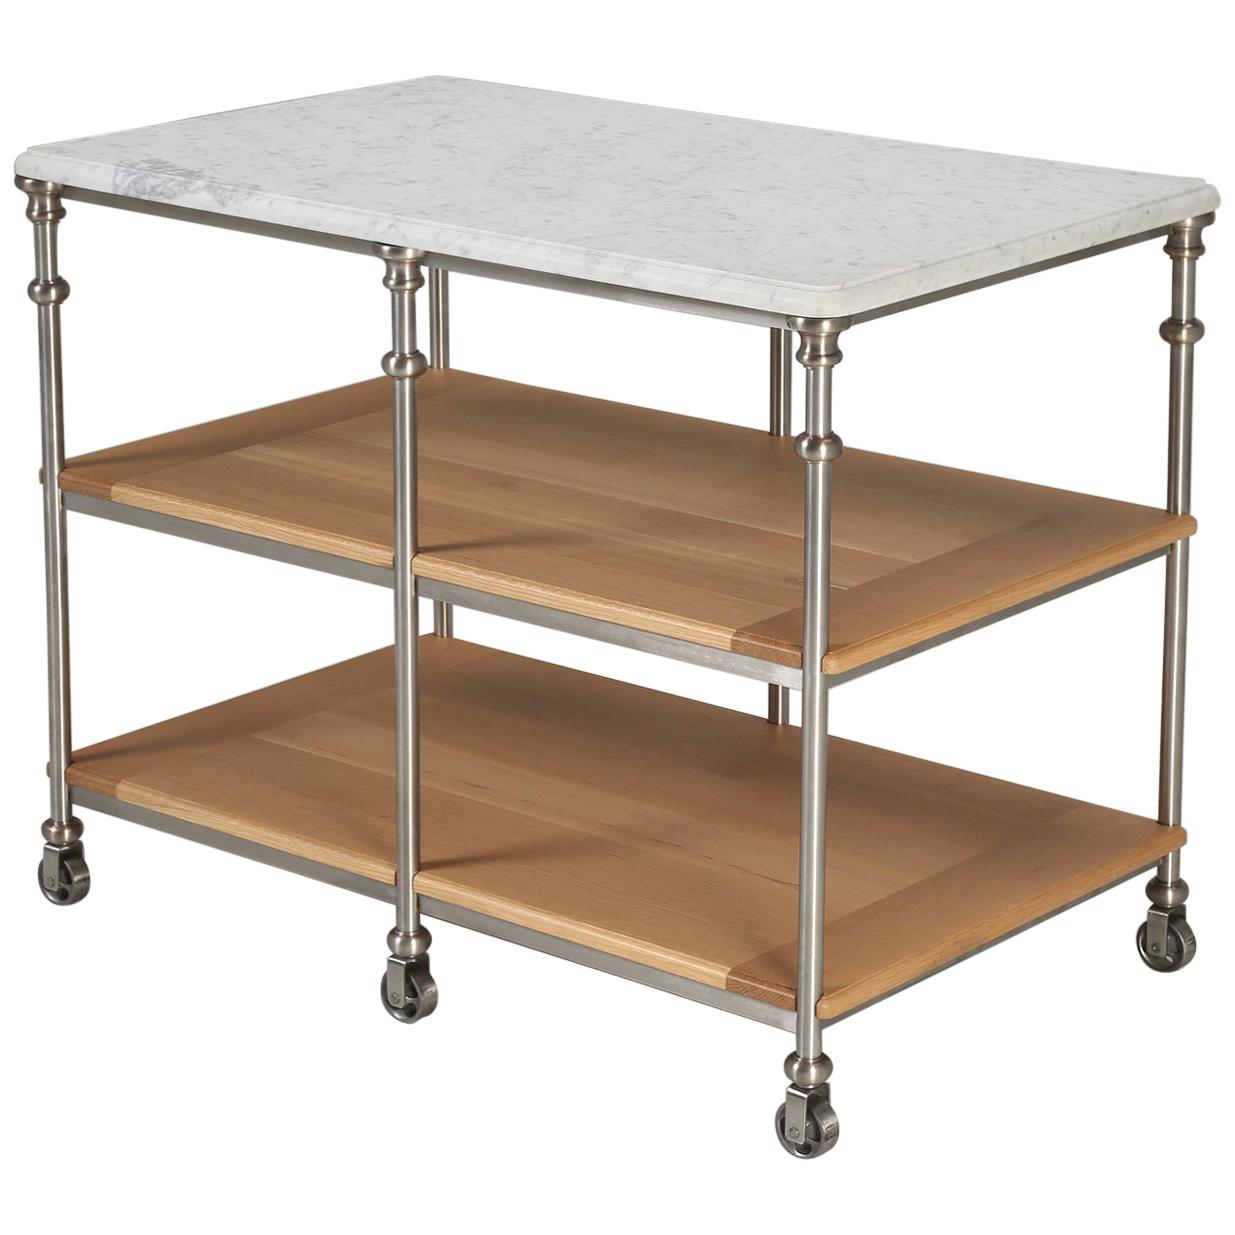 French Industrial Style Kitchen Island Stainless Steel Silver Plated Fittings